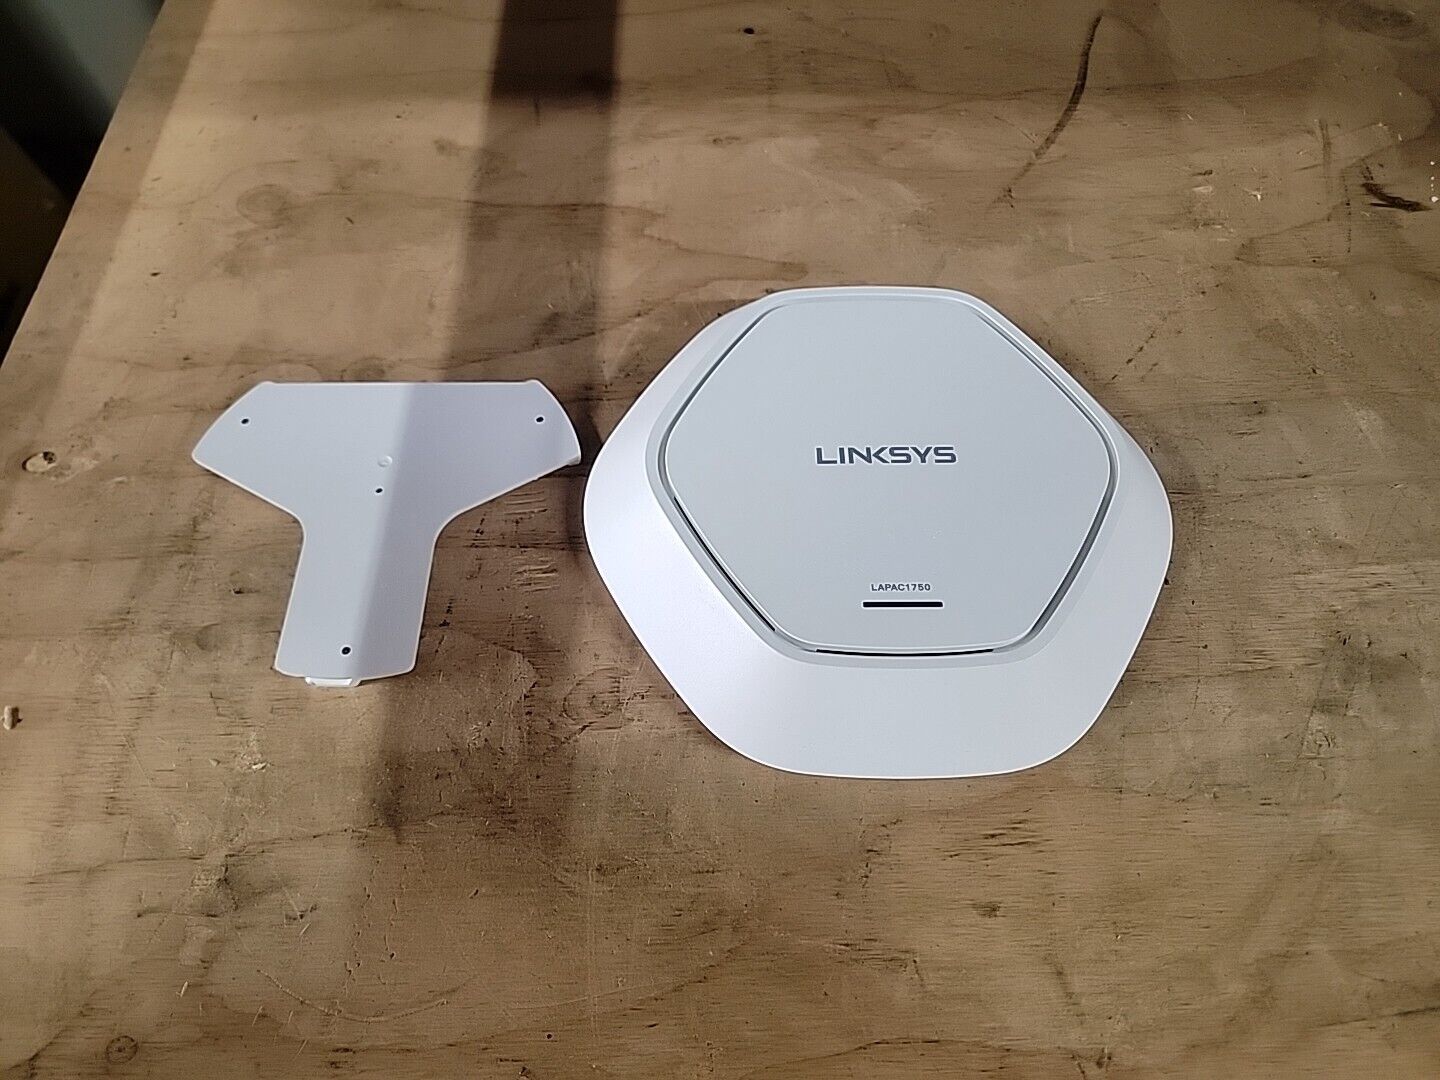 Linksys LAPAC1750 Wi-Fi Wireless Business Dual-Band Access Point -TESTED/RESET